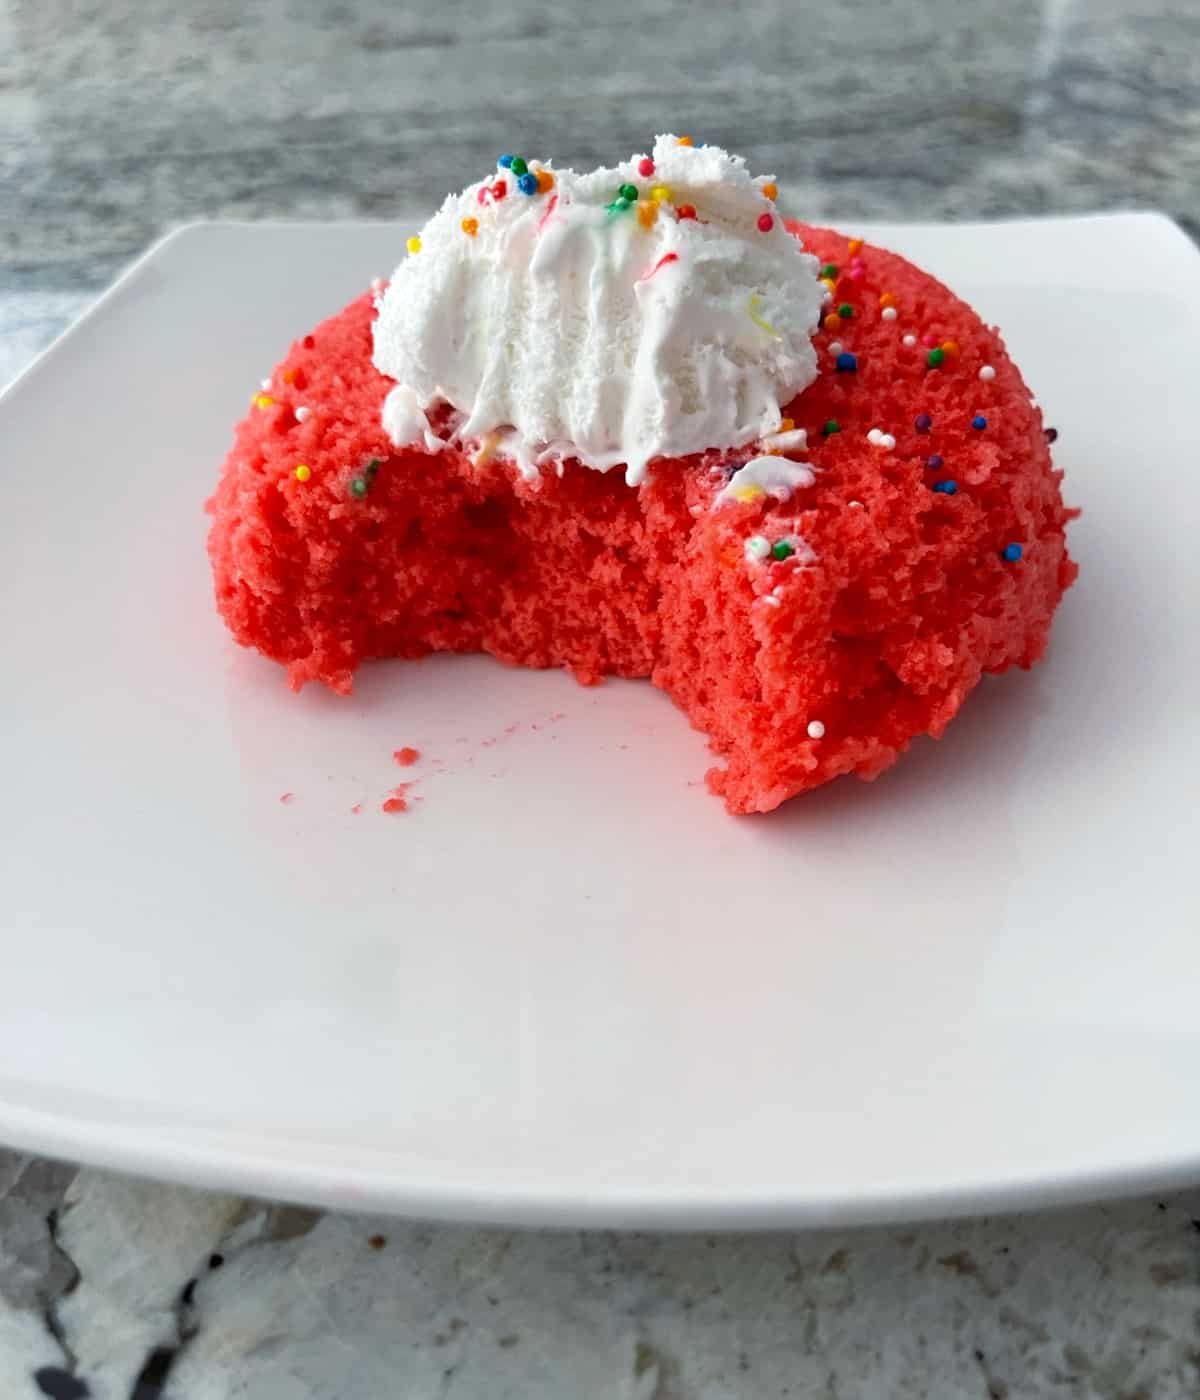 Single serving Raspberry Jello Mug Cake with sprinkled and whipped topping on white plate.